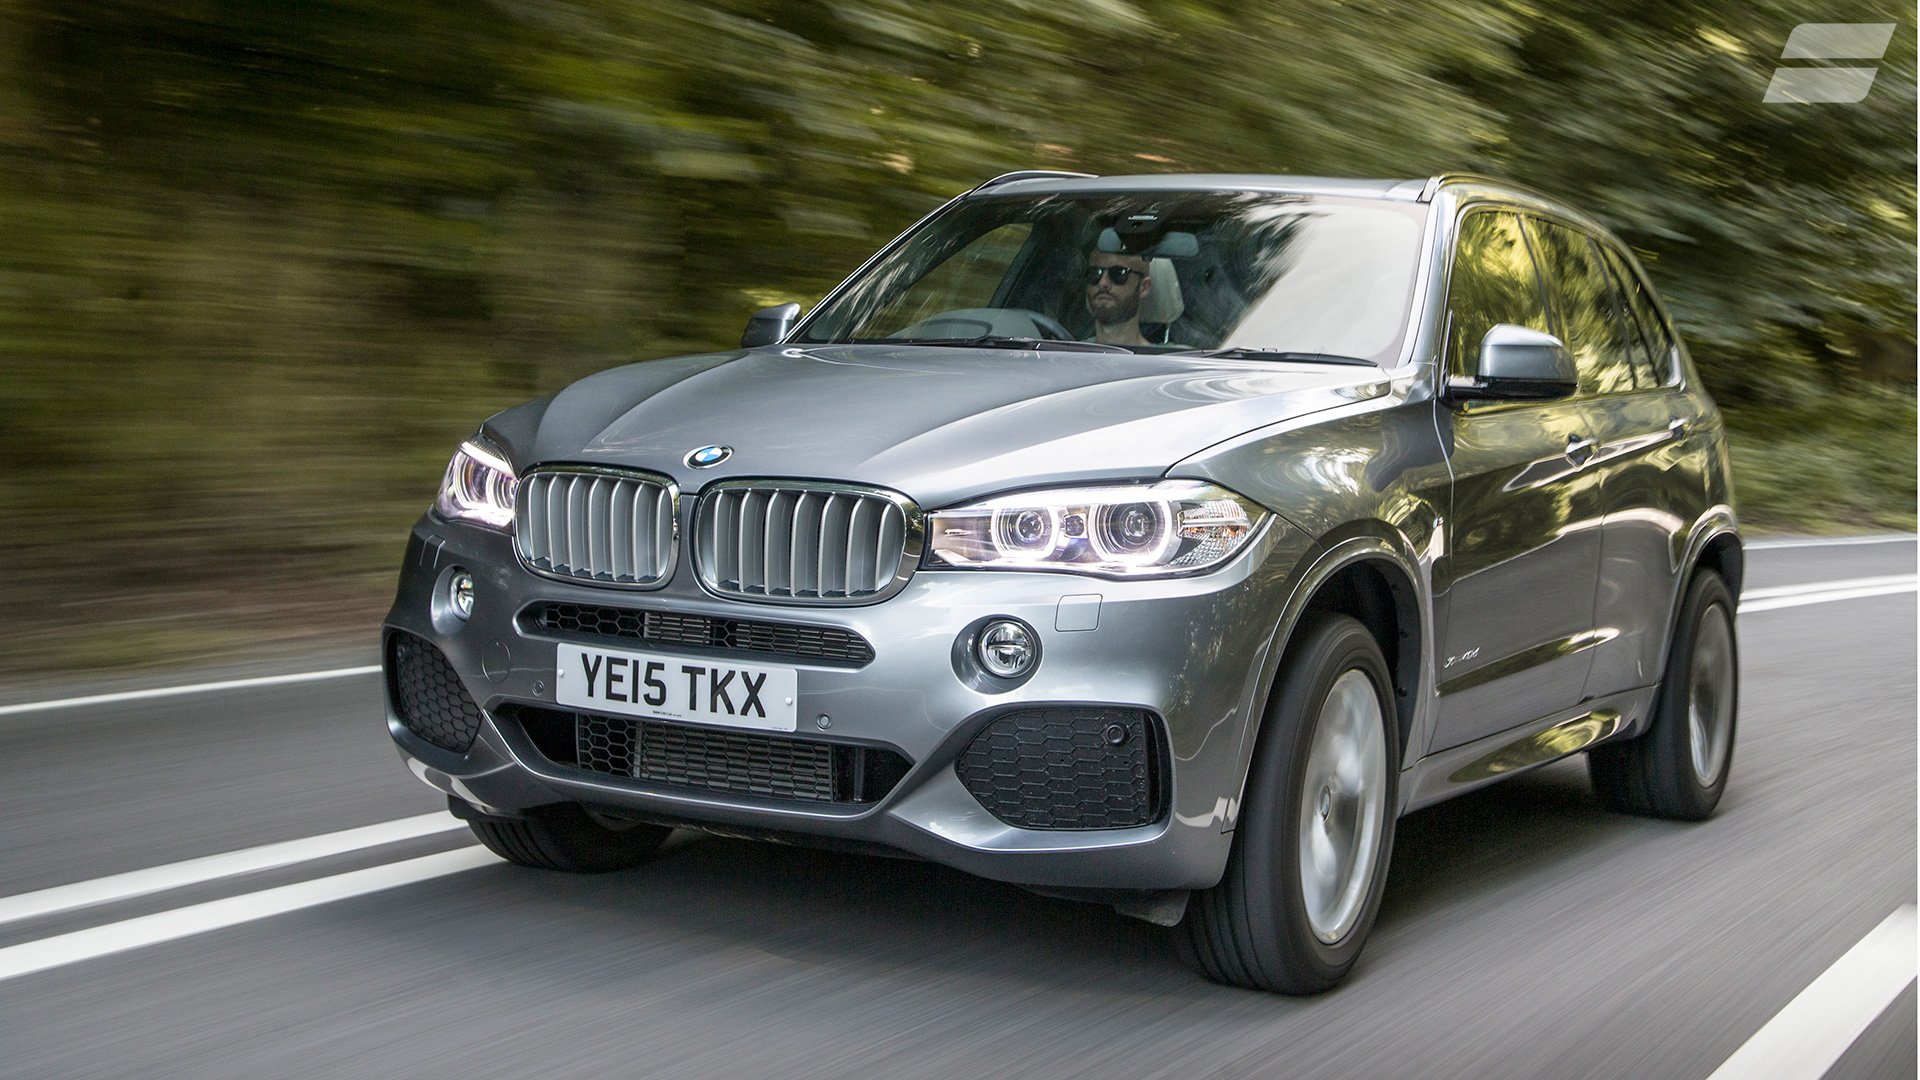 BMW X5 SUV (2012 - ) review | Auto Trader UK